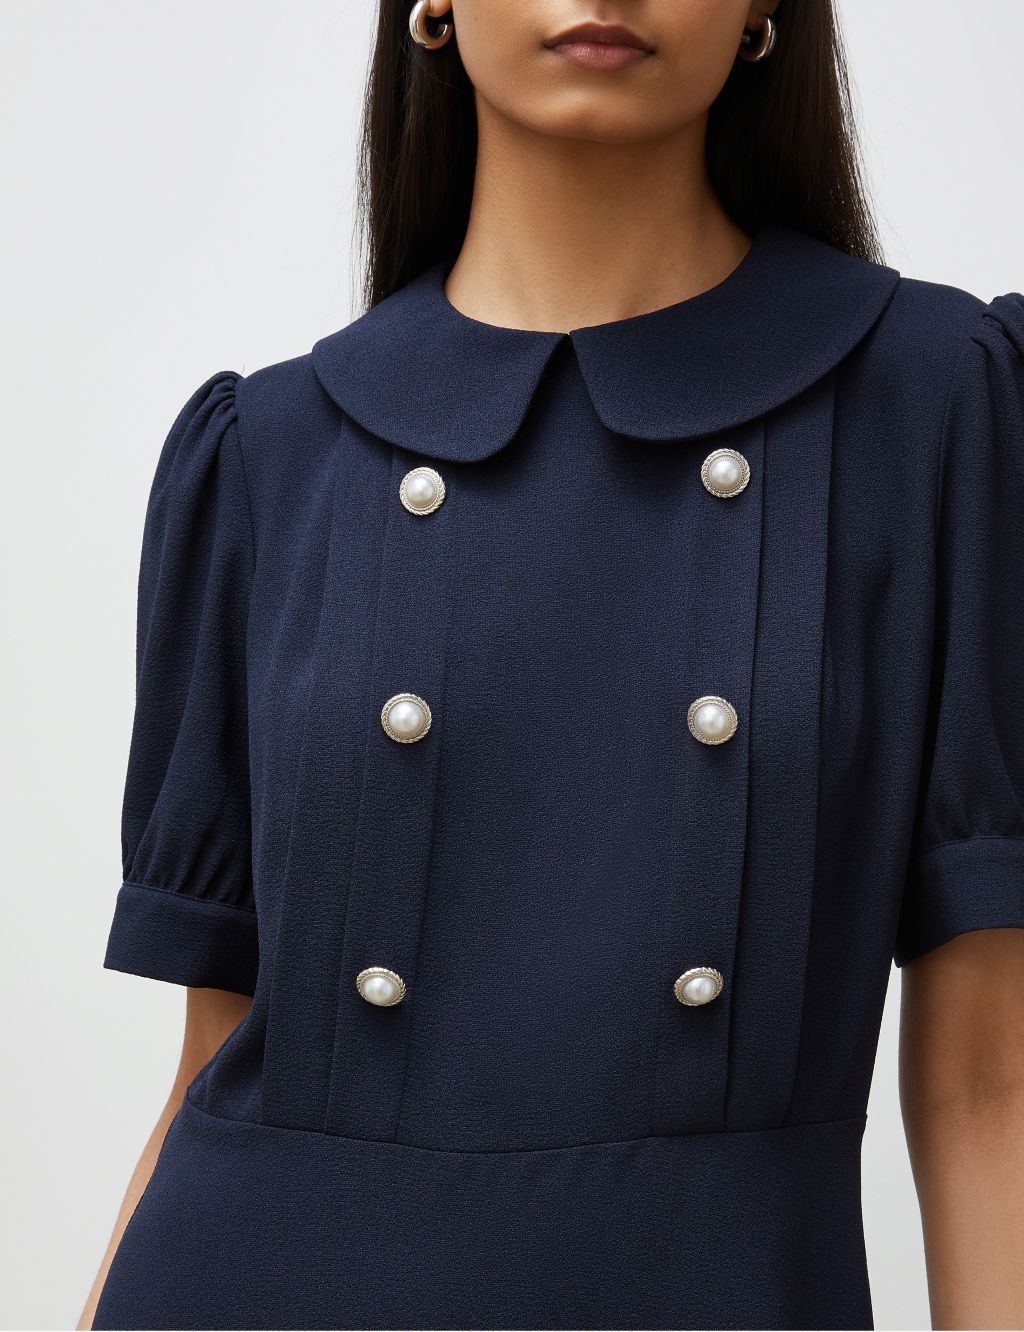 Collared Button Feature Midi Waisted Dress image 3